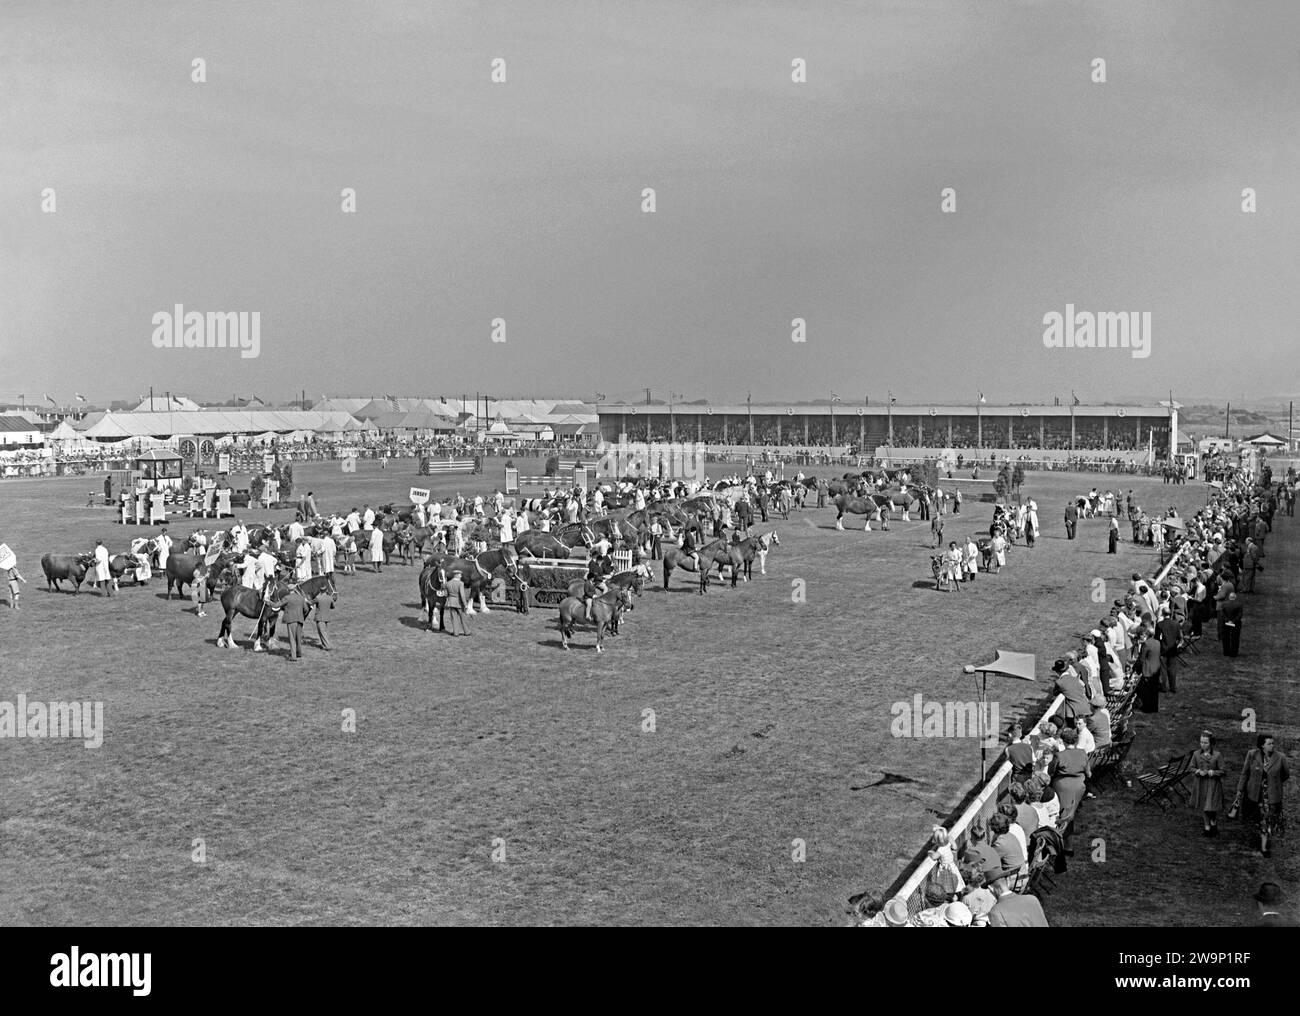 Working horses lined up, plus smaller horses with riders and cattle parading in the showground’s main arena at The Royal Lancashire Show c.1960. Behind the work-horses are more cows – placards held up indicate they are Jersey and Dairy Shorthorn breeds. The Royal Lancashire Show (RLS) is an agricultural show which takes place every year in Lancashire, England, UK. The show is organised by the Royal Lancashire Agricultural Society (RLAS) and is one of Britain's oldest, first taking place in 1767. From 1954 the show was held at Stanley Park, Blackpool up until 1972 – a vintage 1950s/60s photo. Stock Photo